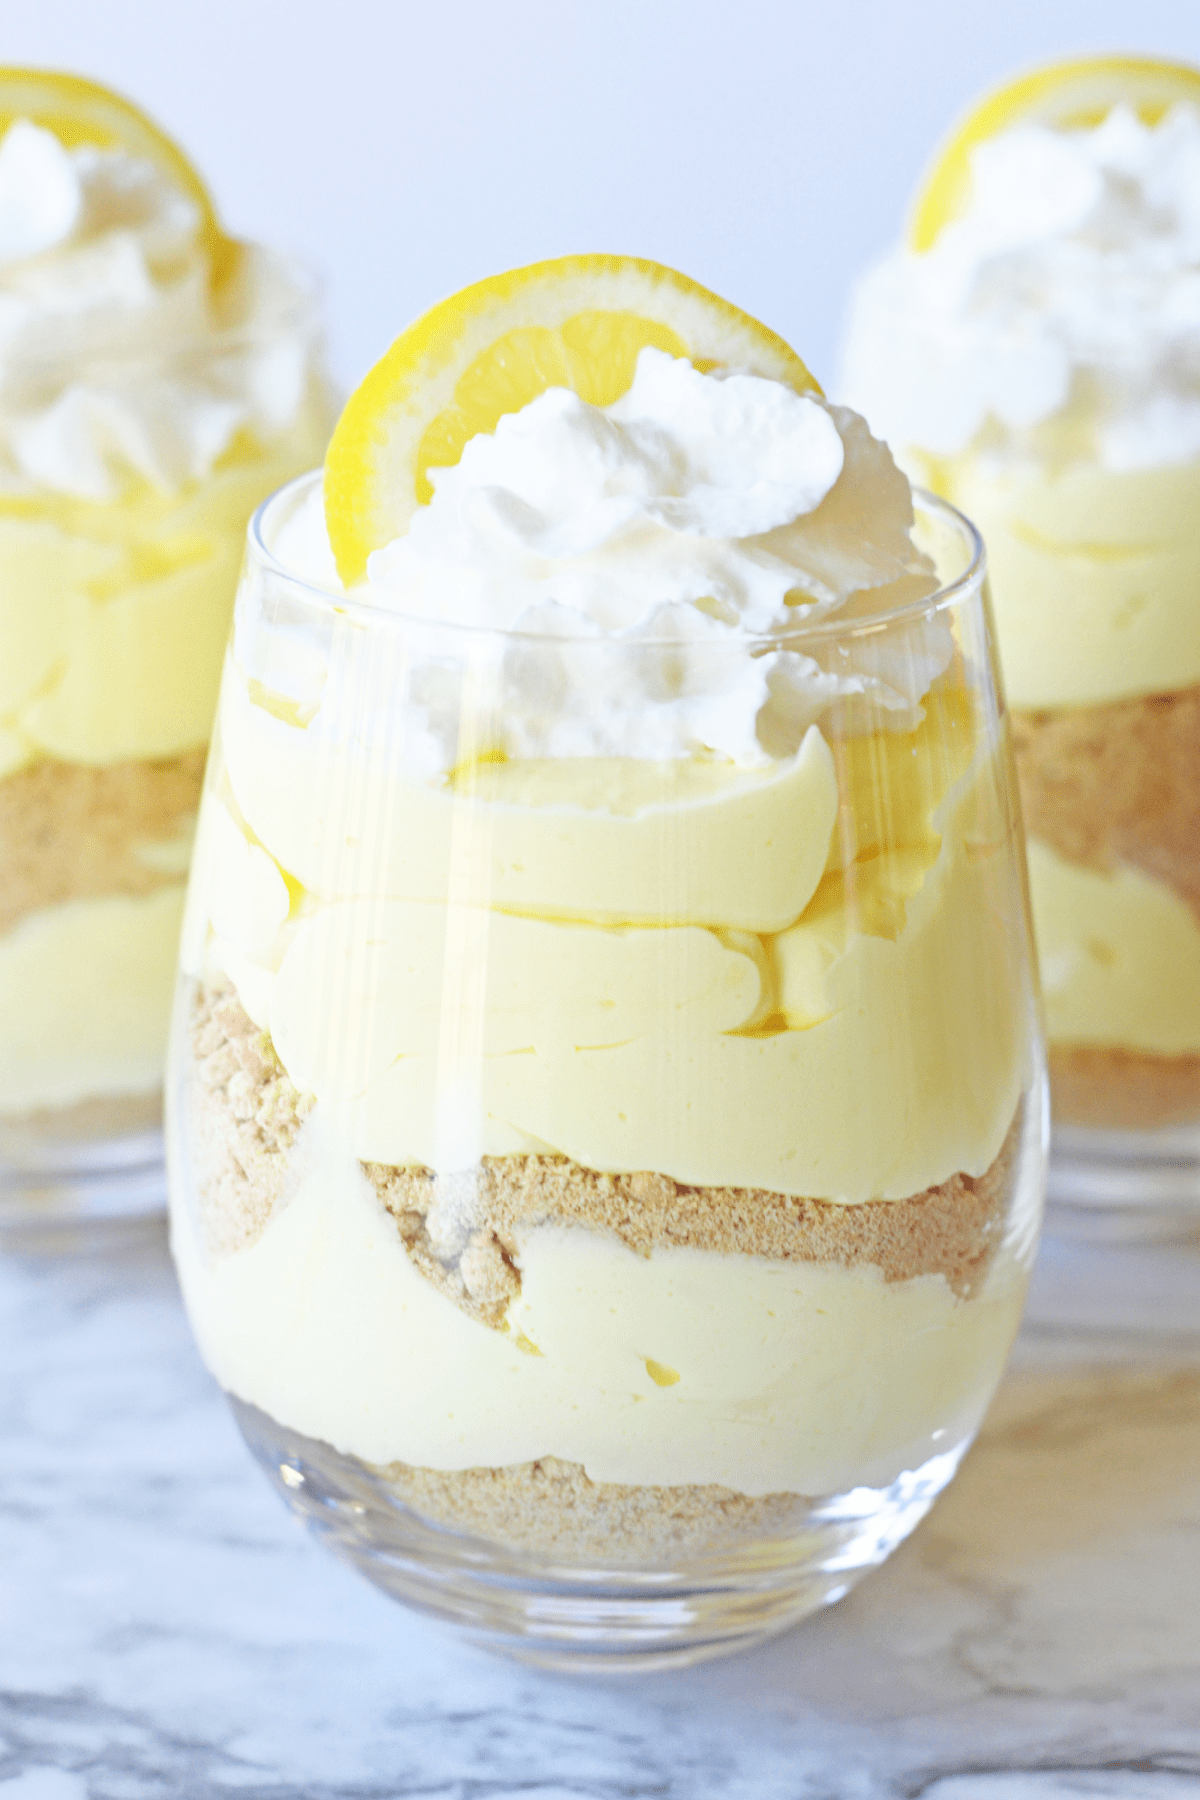 Lemon Cheesecake Parfait topped with whipped cream and lemon